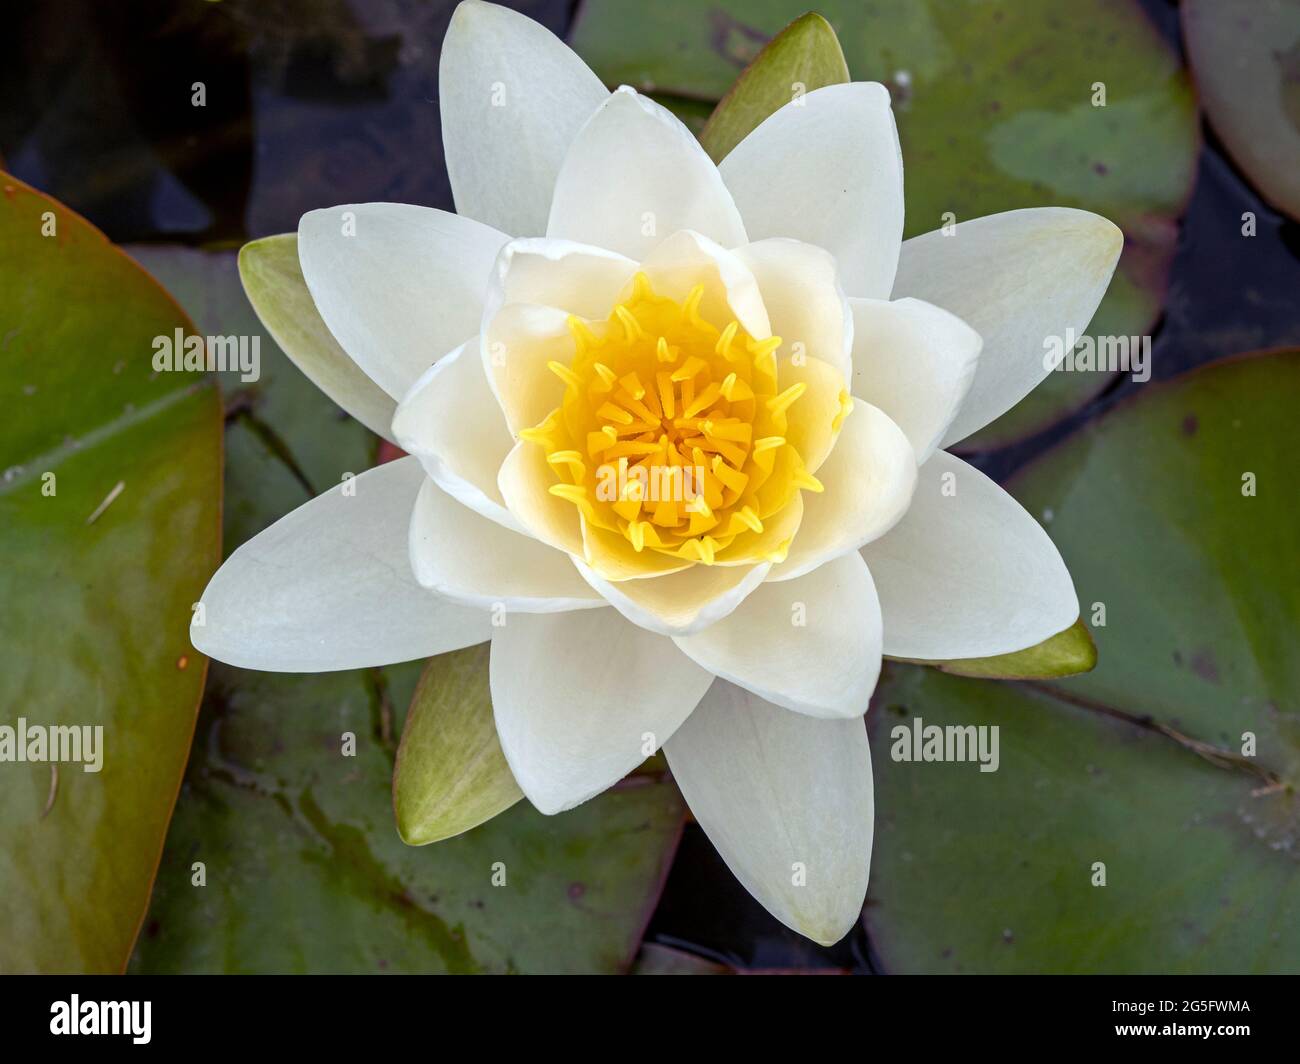 White and yellow waterlily flower seen from above Stock Photo